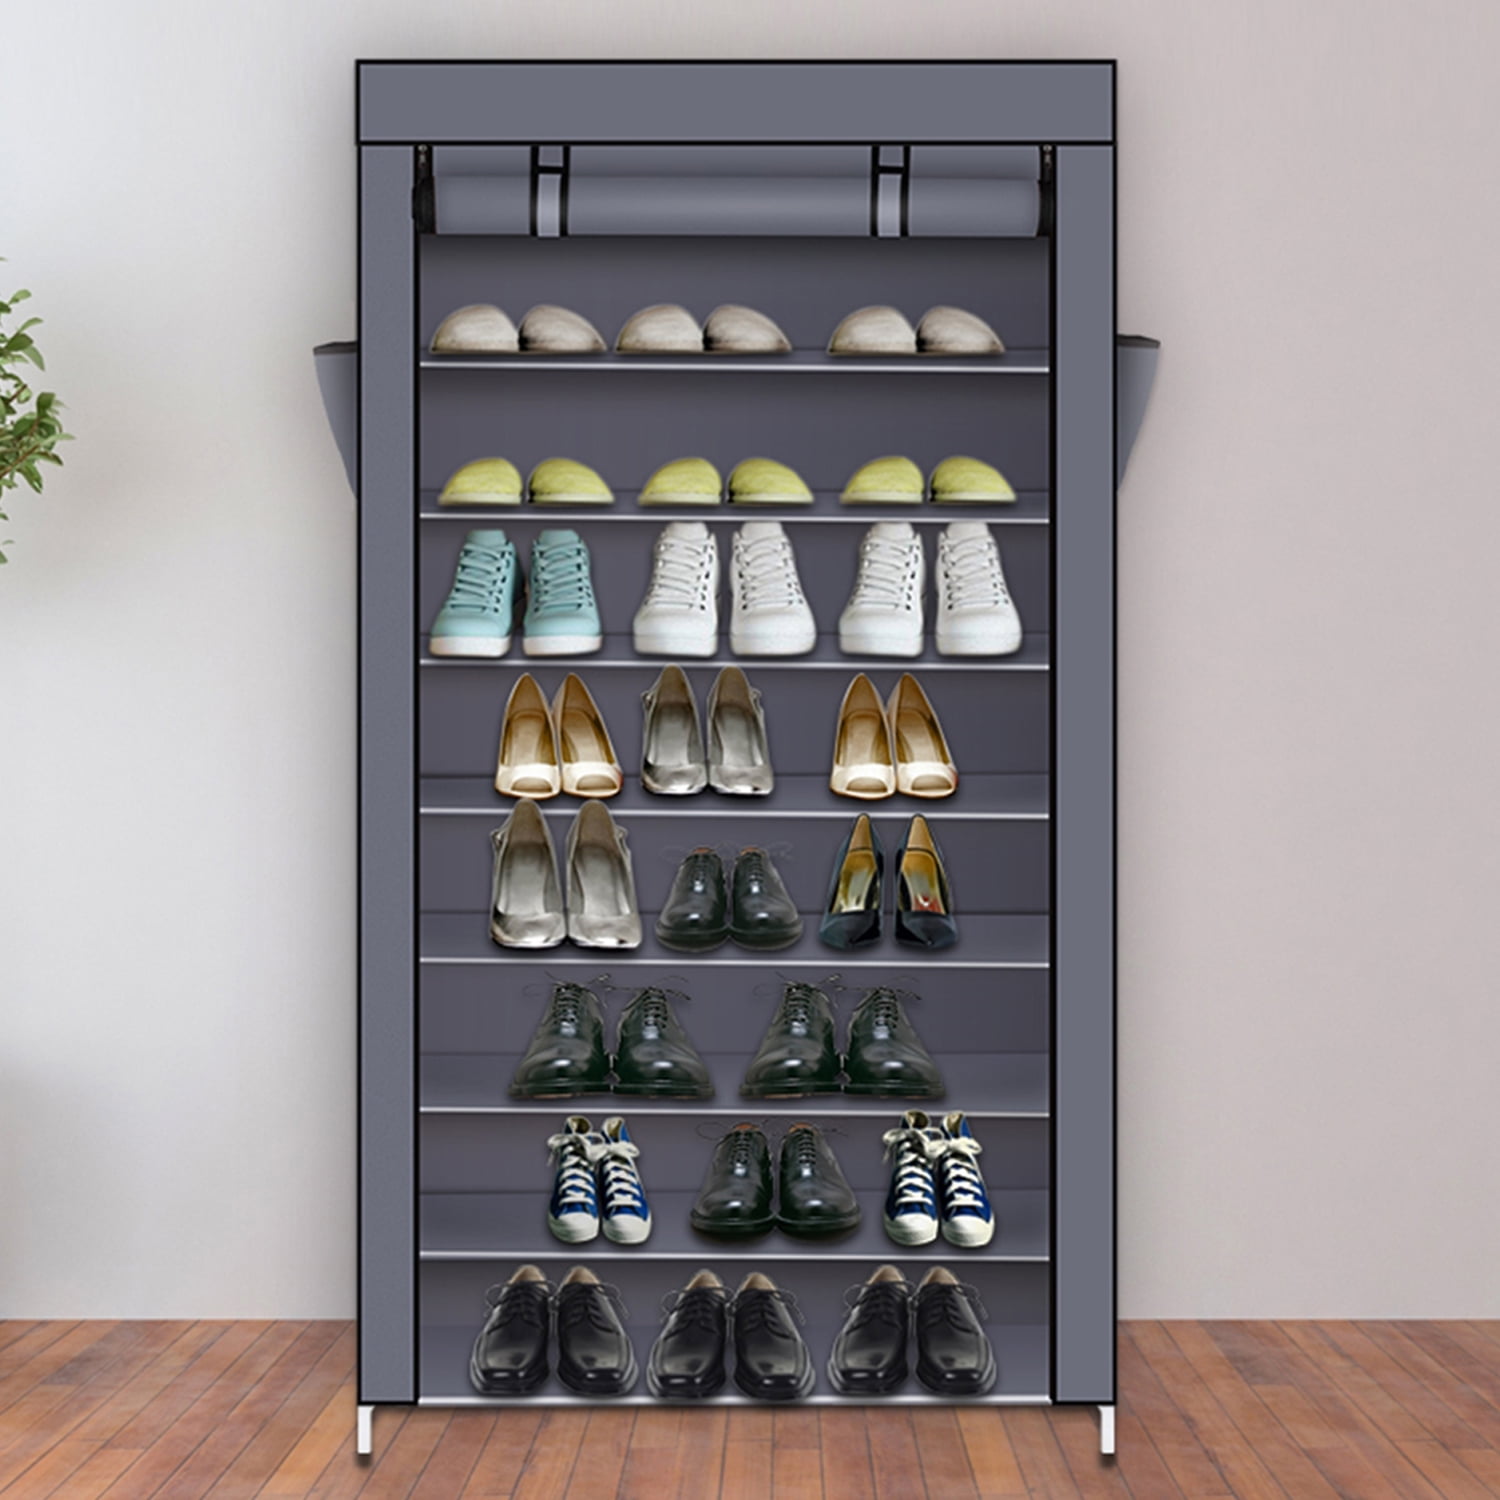 Uwr-nite Shoe Rack Organizer with 4 Tiers, for Up to 20 Pairs of Shoes, Vertical Large Shoe Rack with Removable, Water, Dust & Oil Resistant Shelves